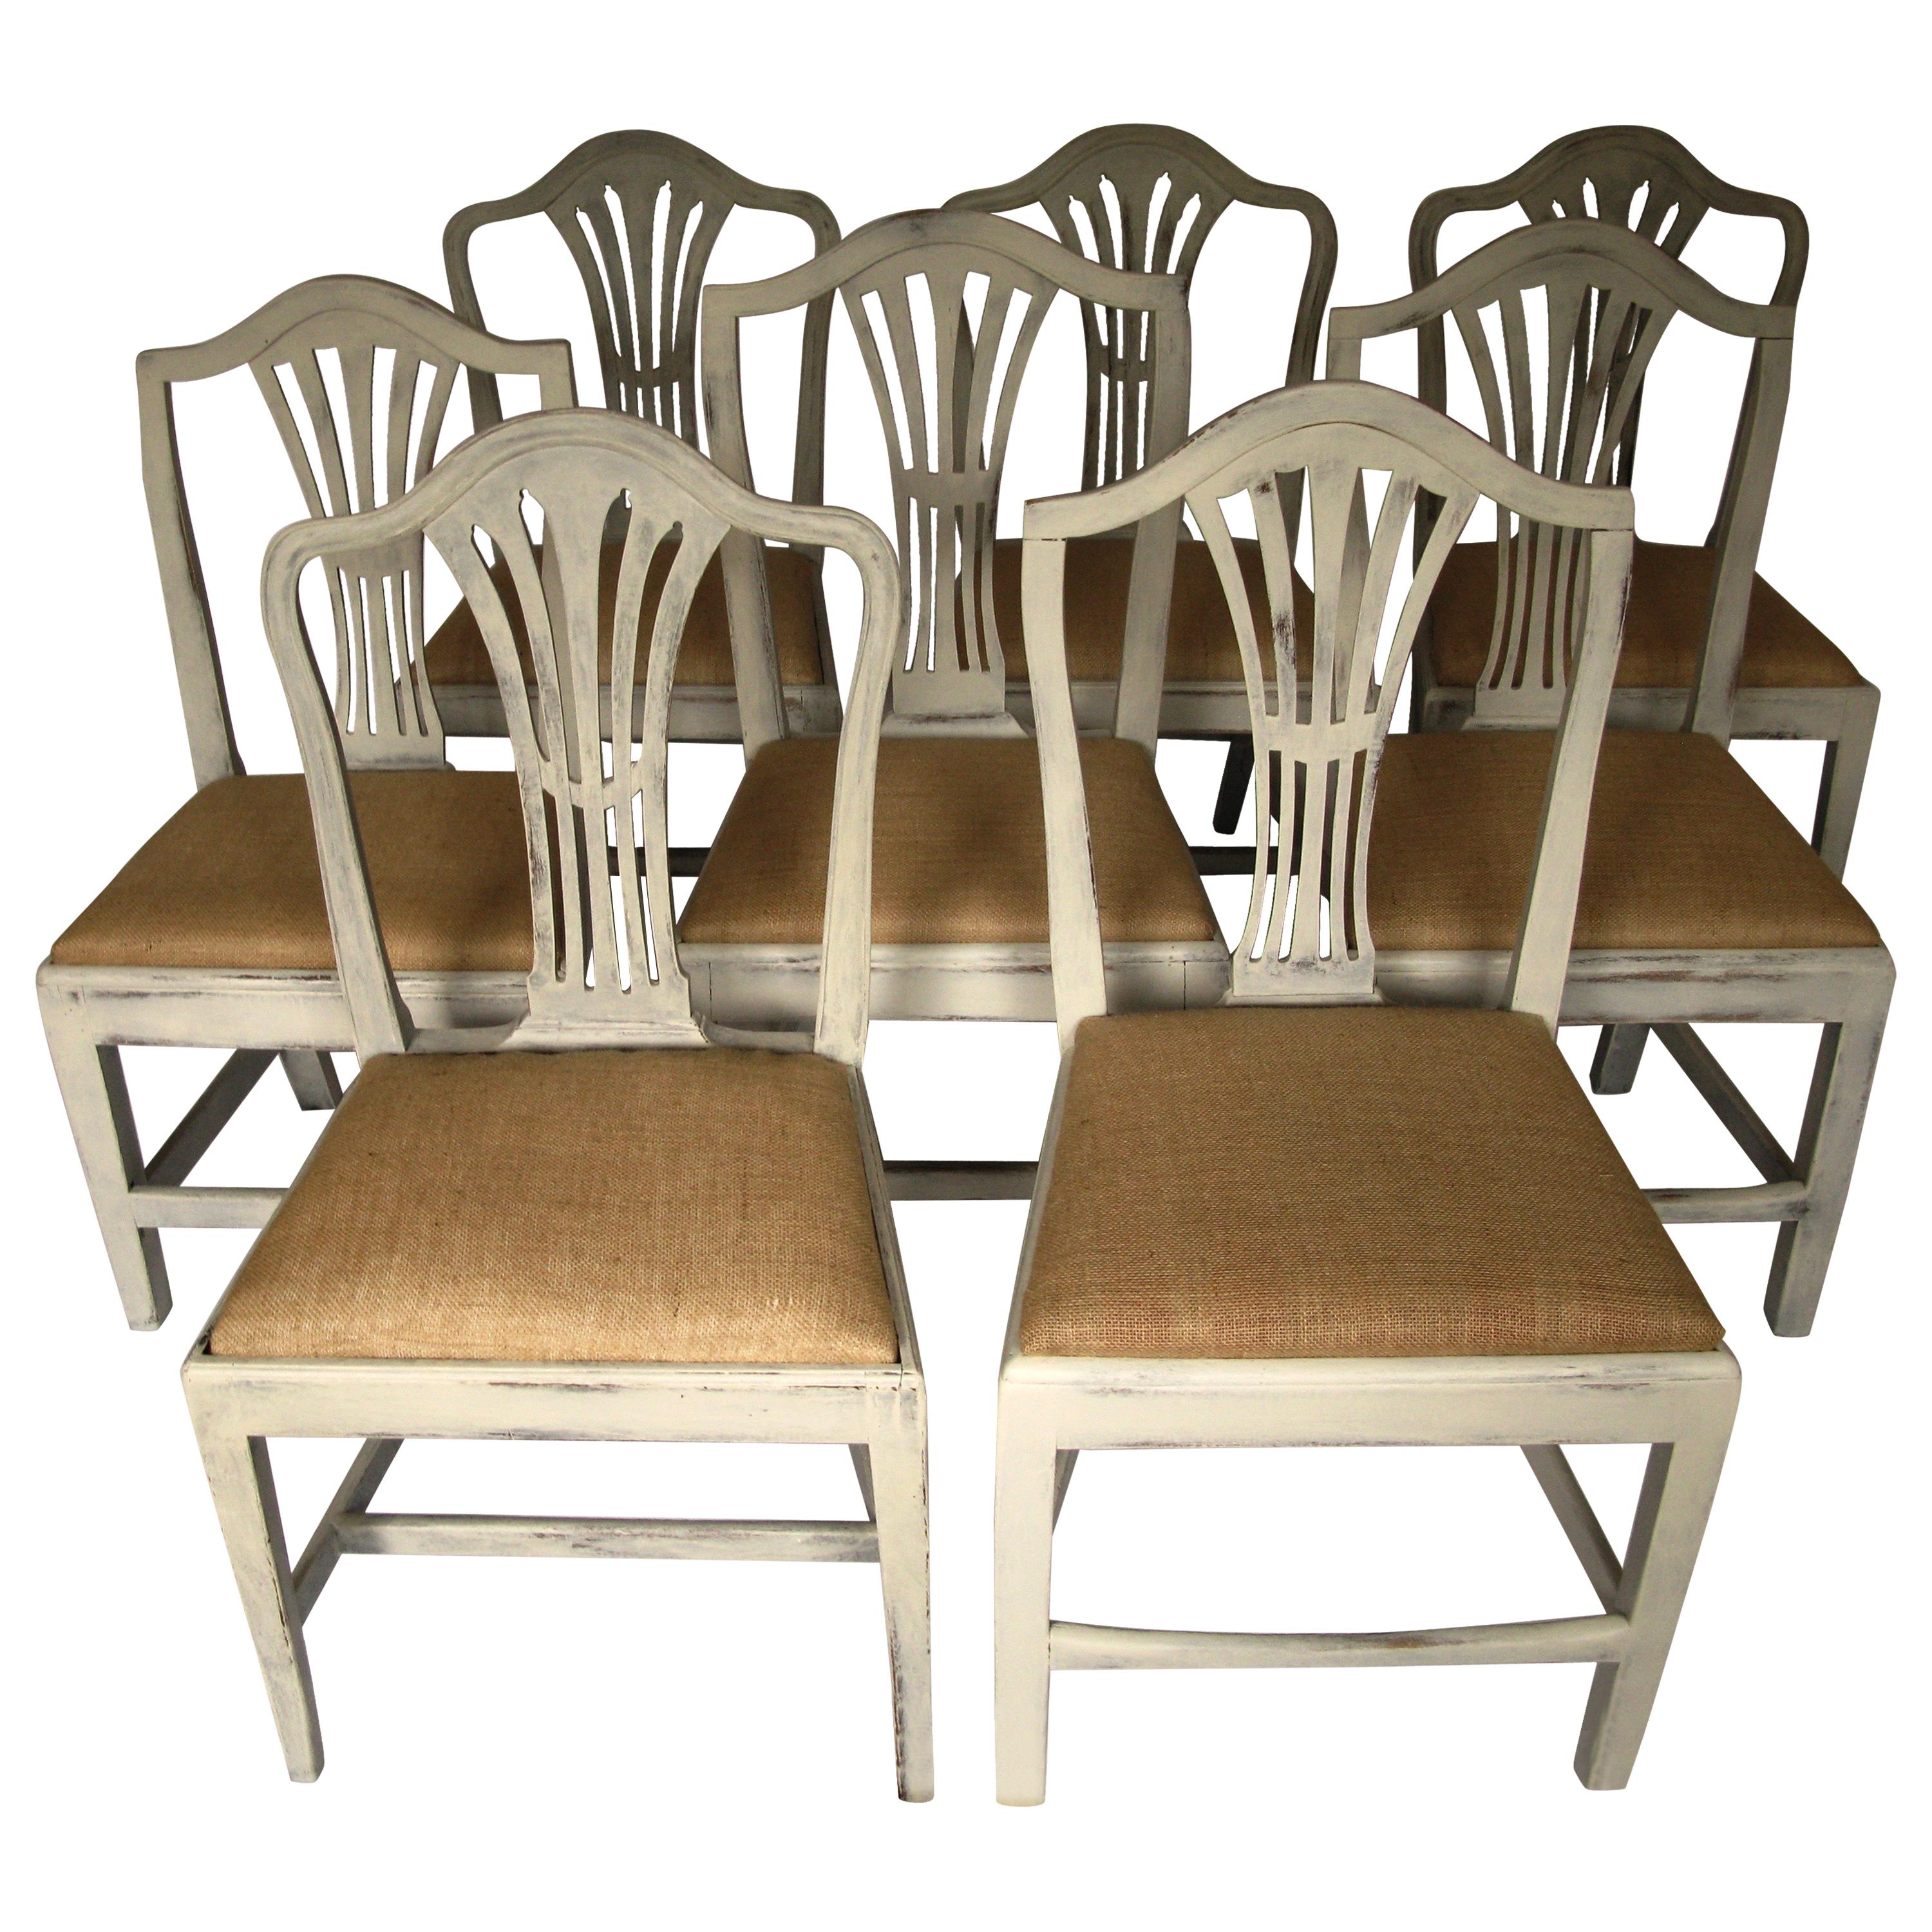 Harlequin Set of 8 Antique Chairs, Early 19th Century, England, Decorative 